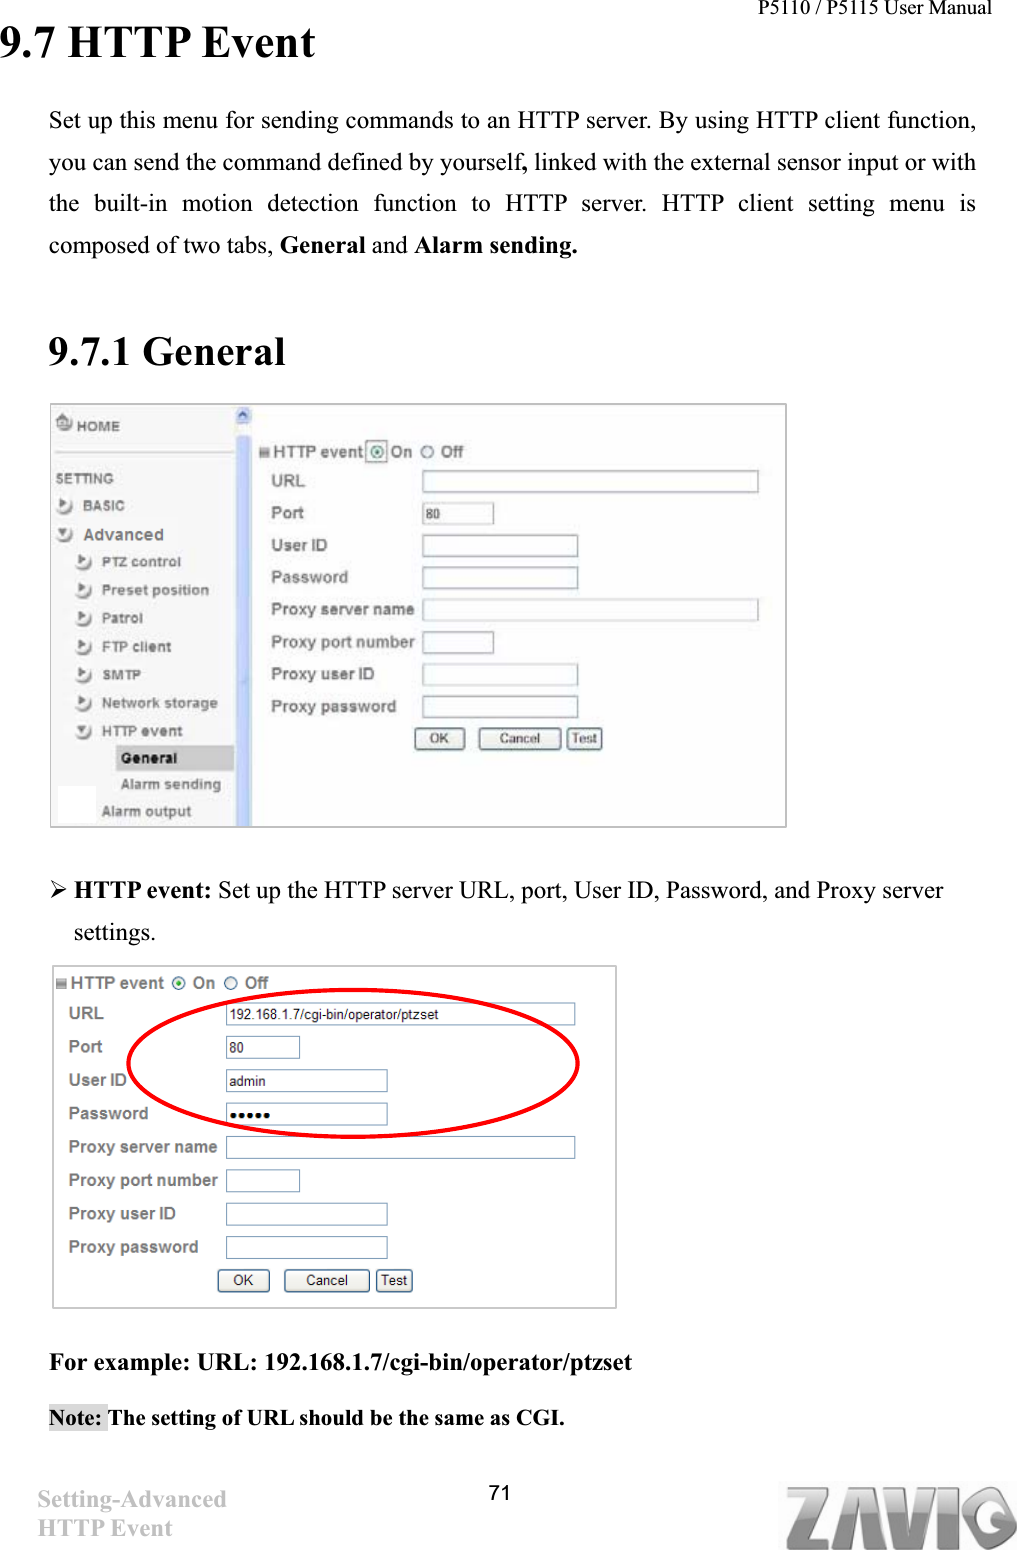 P5110 / P5115 User Manual   719.7 HTTP Event Set up this menu for sending commands to an HTTP server. By using HTTP client function, you can send the command defined by yourself,linked with the external sensor input or with the built-in motion detection function to HTTP server. HTTP client setting menu is composed of two tabs, General and Alarm sending. 9.7.1 General     ¾HTTP event: Set up the HTTP server URL, port, User ID, Password, and Proxy server settings.For example: URL: 192.168.1.7/cgi-bin/operator/ptzset Note: The setting of URL should be the same as CGI.Setting-AdvancedHTTP Event   